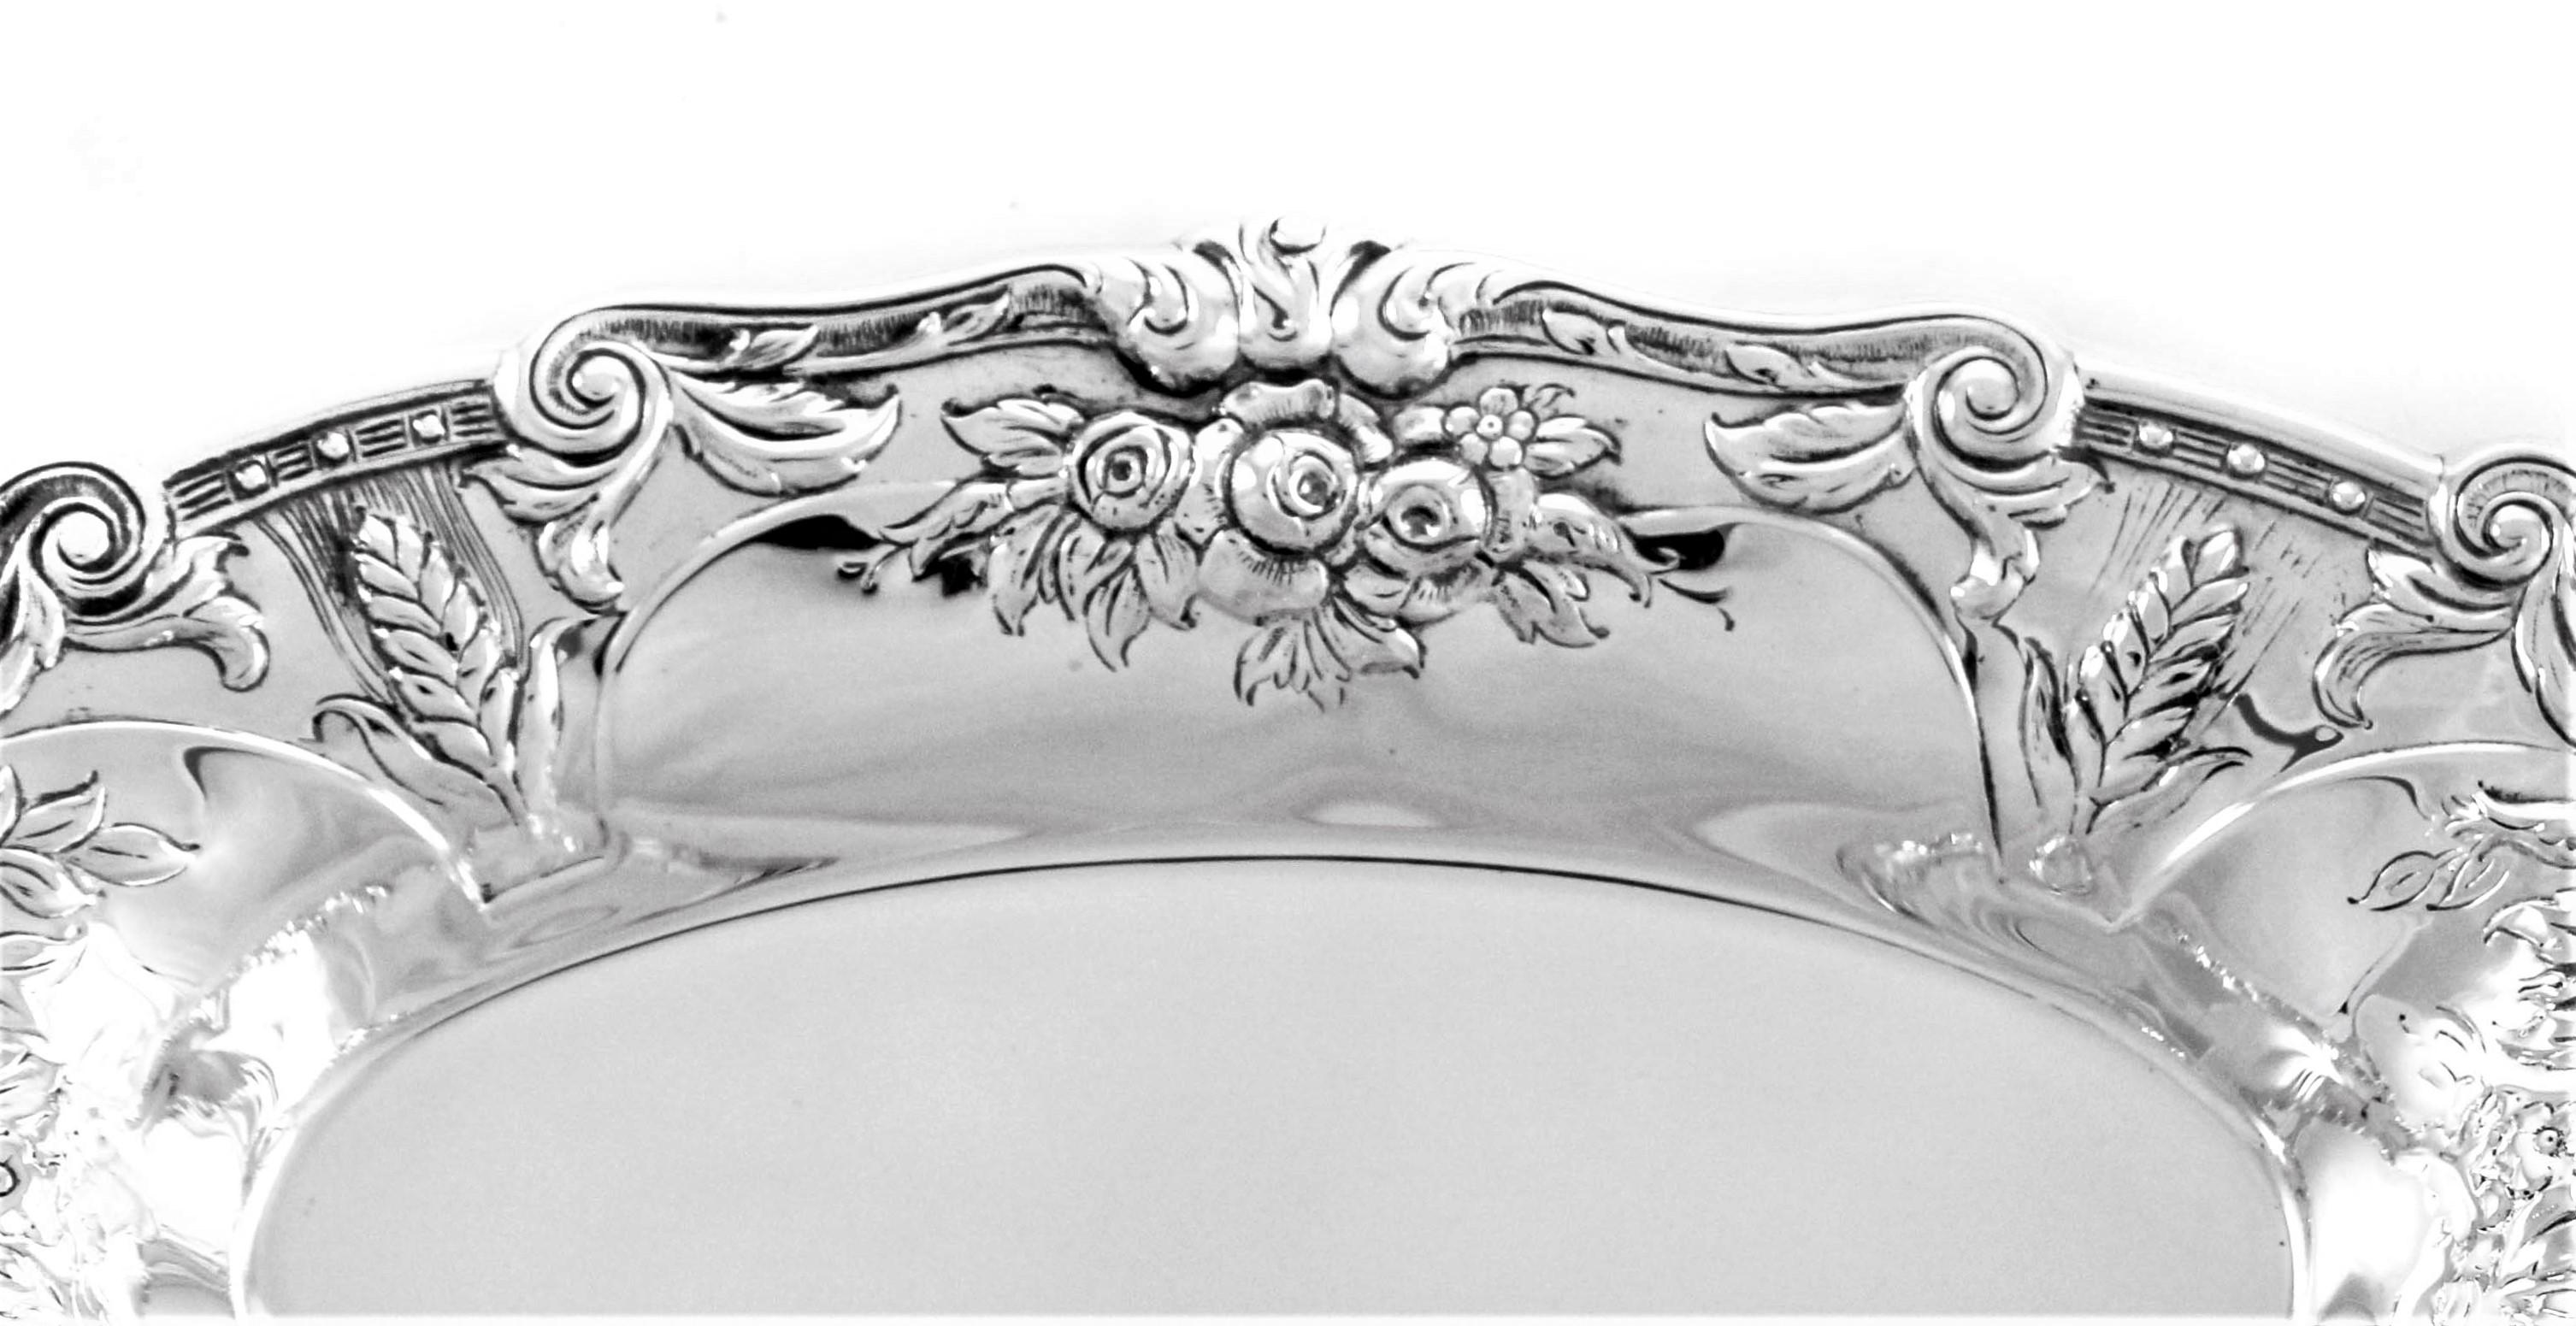 Francis I is one the most famous patterns in the history of American sterling silver. The iconic pattern by Reed and Barton has been very sought after since it was first introduced in 1907. Clusters of fruit and flowers decorate each of the four